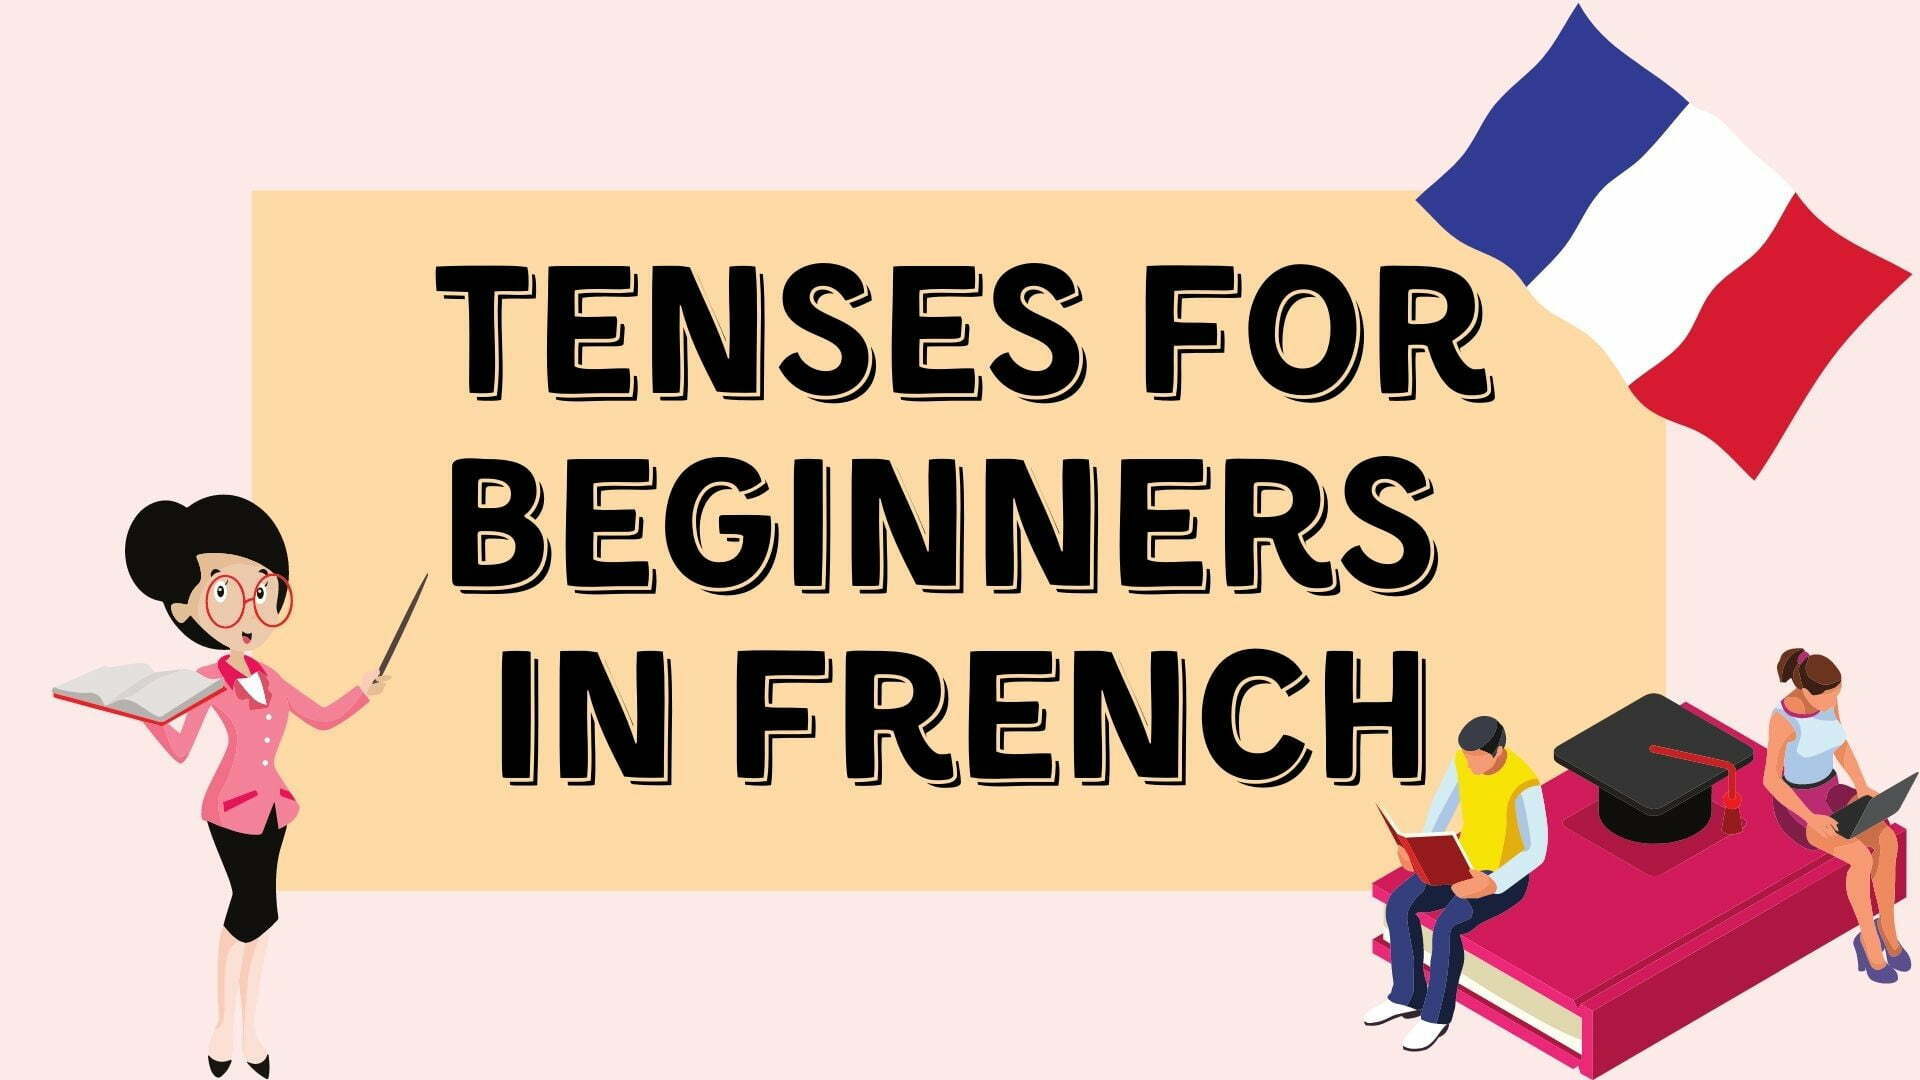 The most important tenses for beginners in French